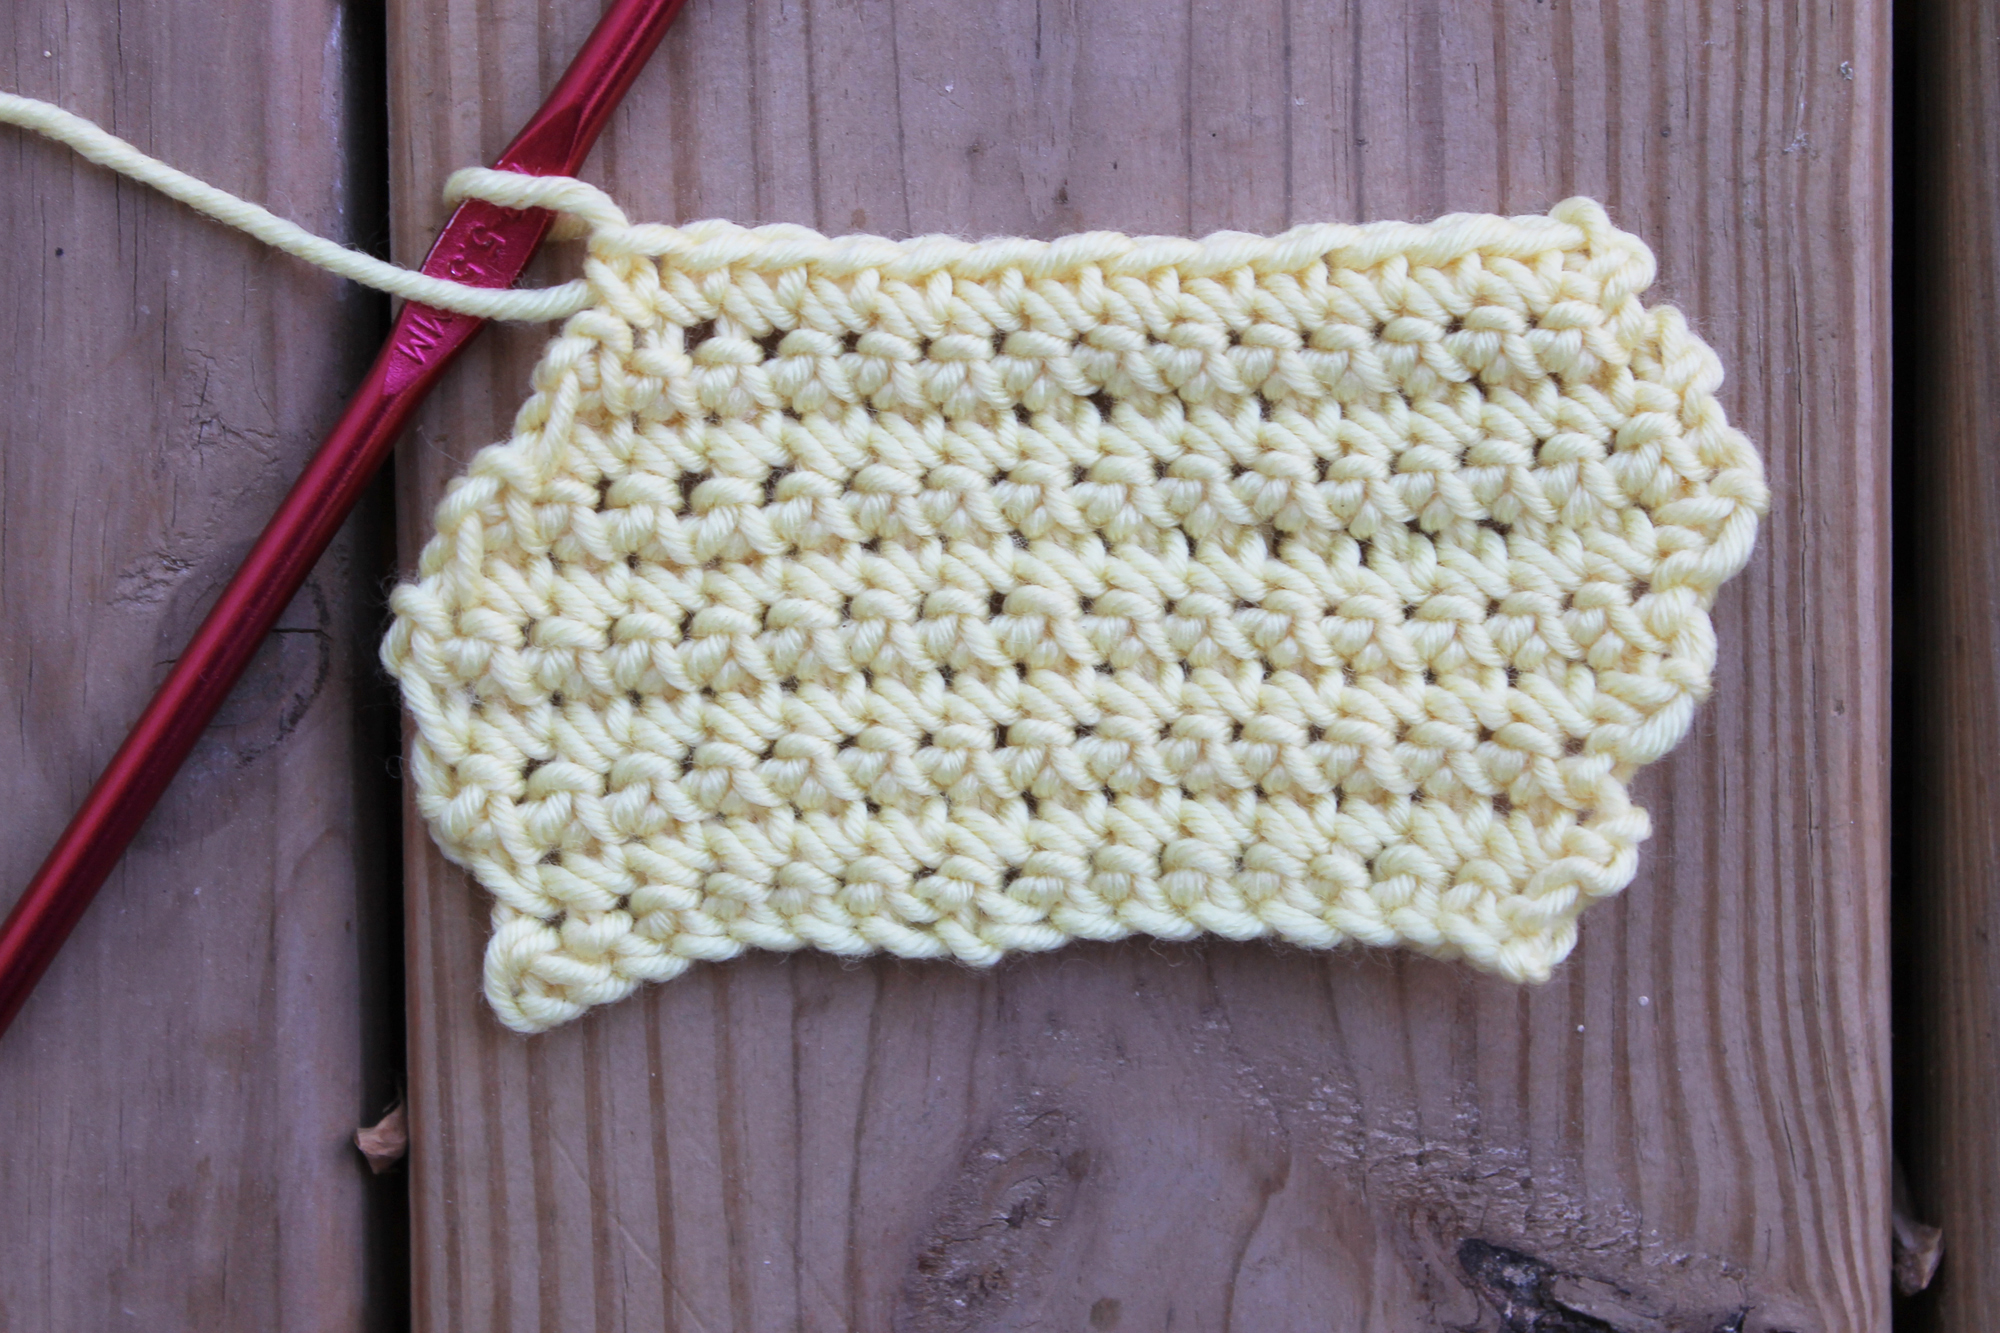 7 Tips for Counting Rows in Crochet